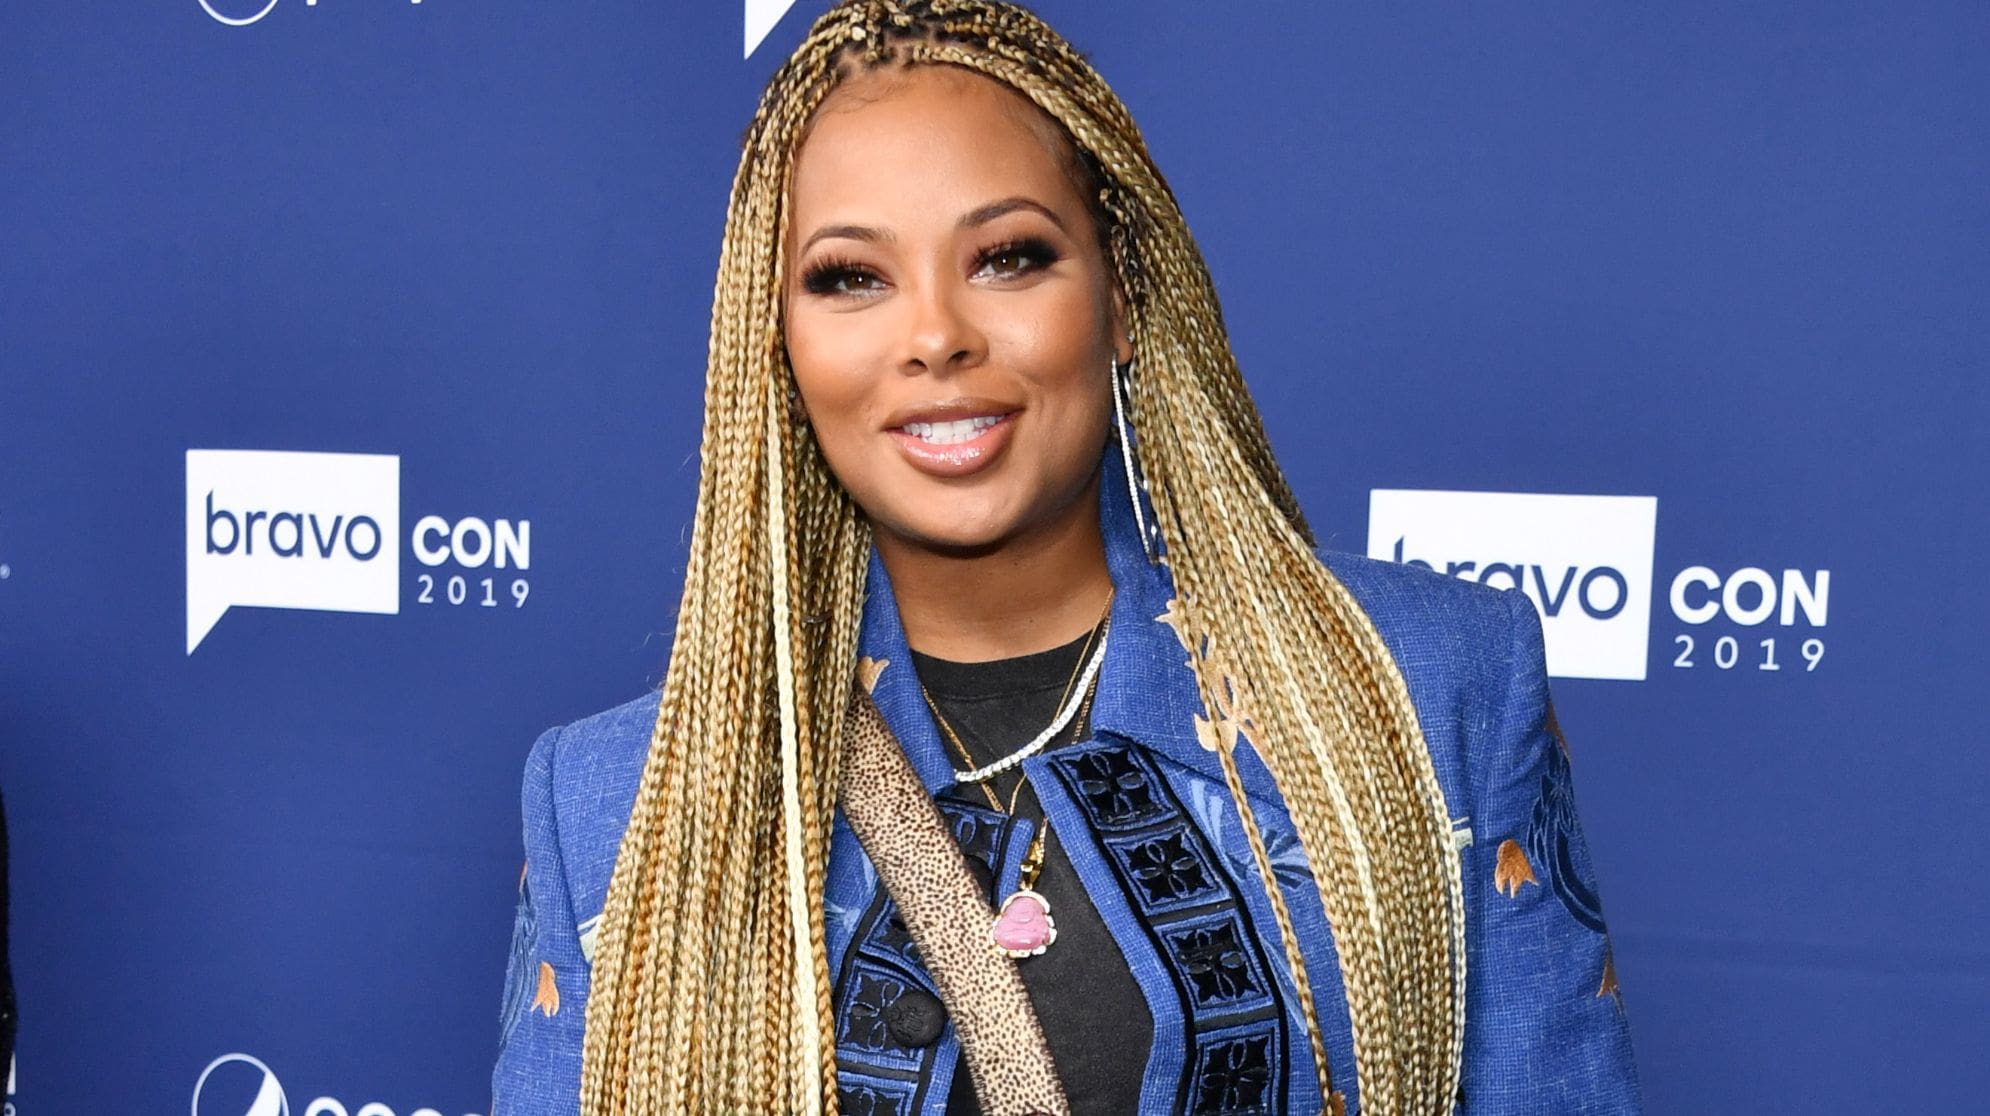 Eva Marcille Talks About Women Leaders And Doing What's Right For The City